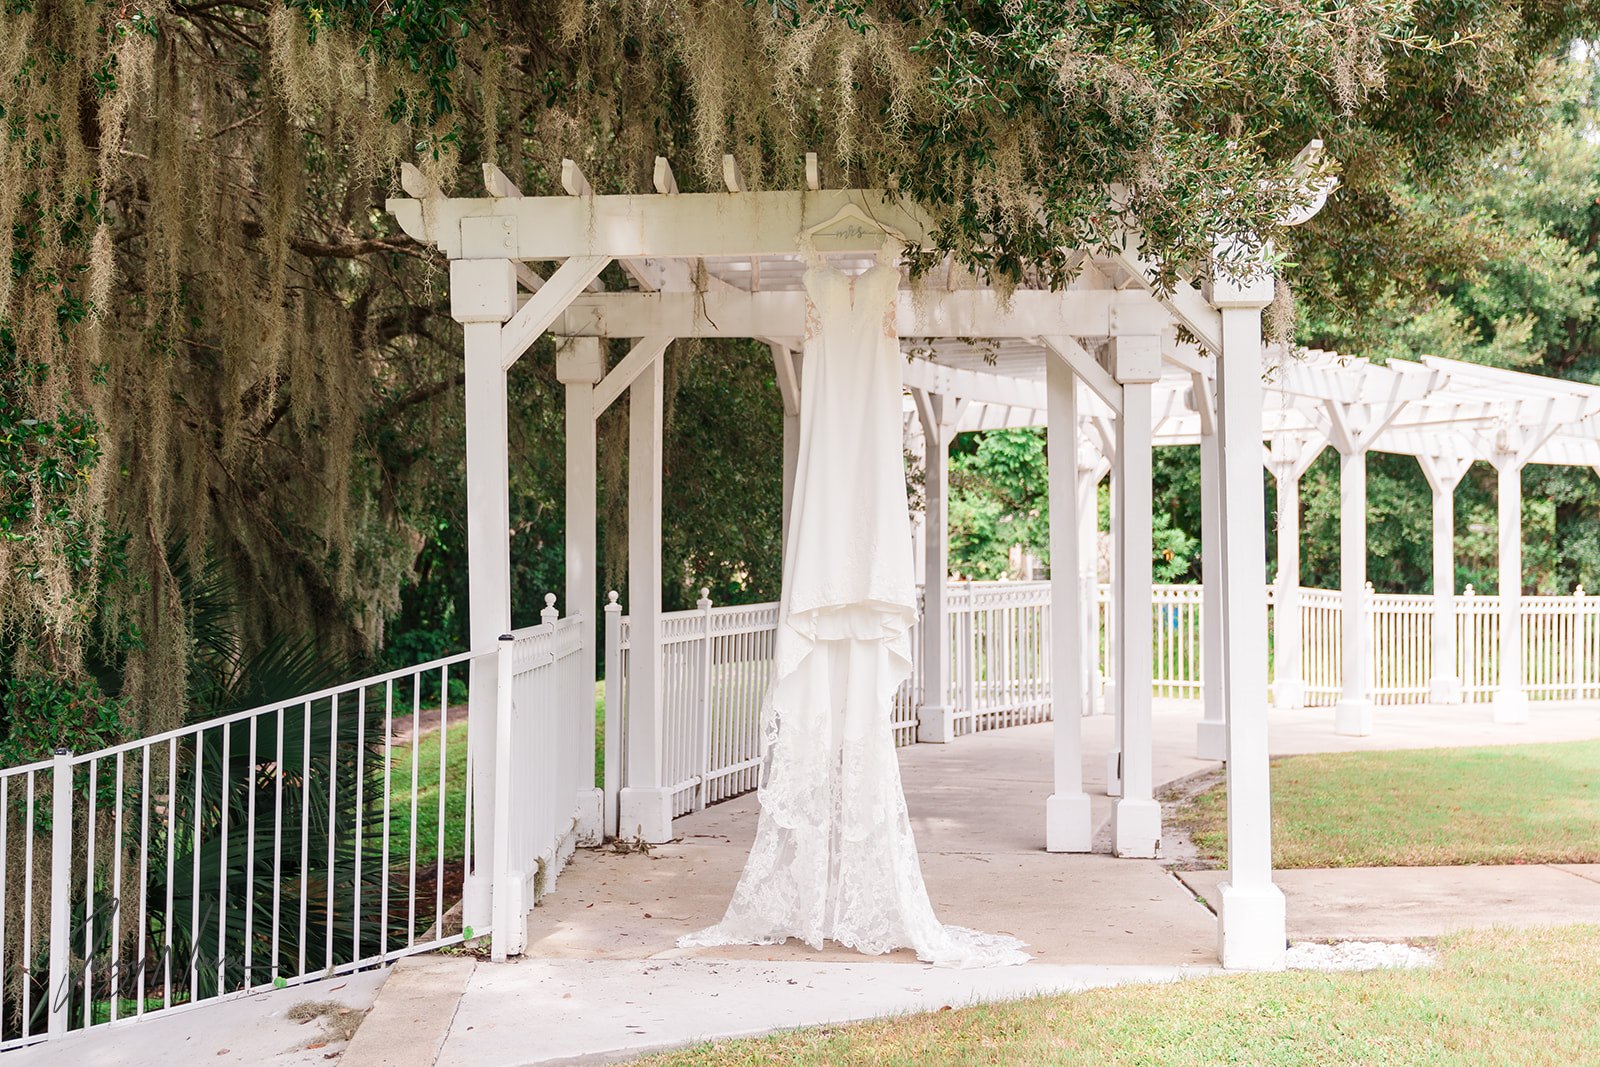 Shelby's wedding dress hanging elegantly from the archway in the outdoor walkway at Lake Mary Event Center